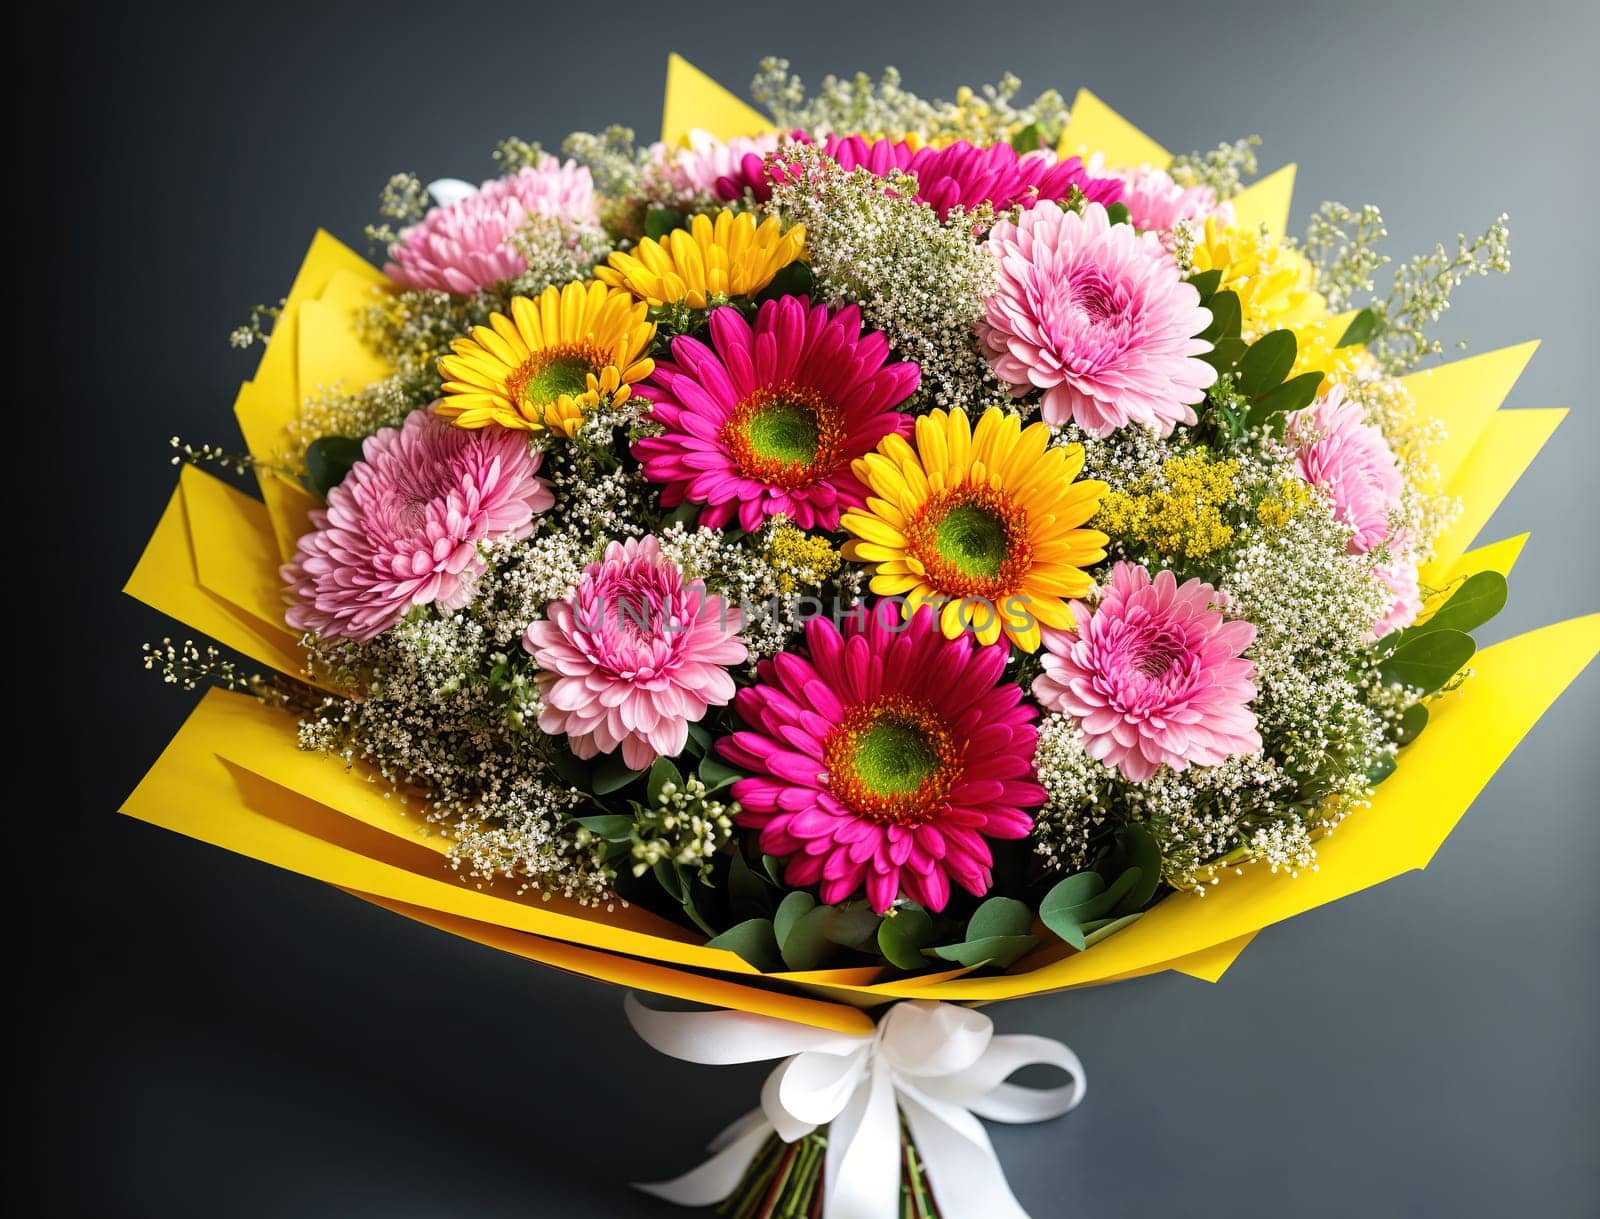 The image is a bouquet of pink and yellow flowers arranged in a vase.